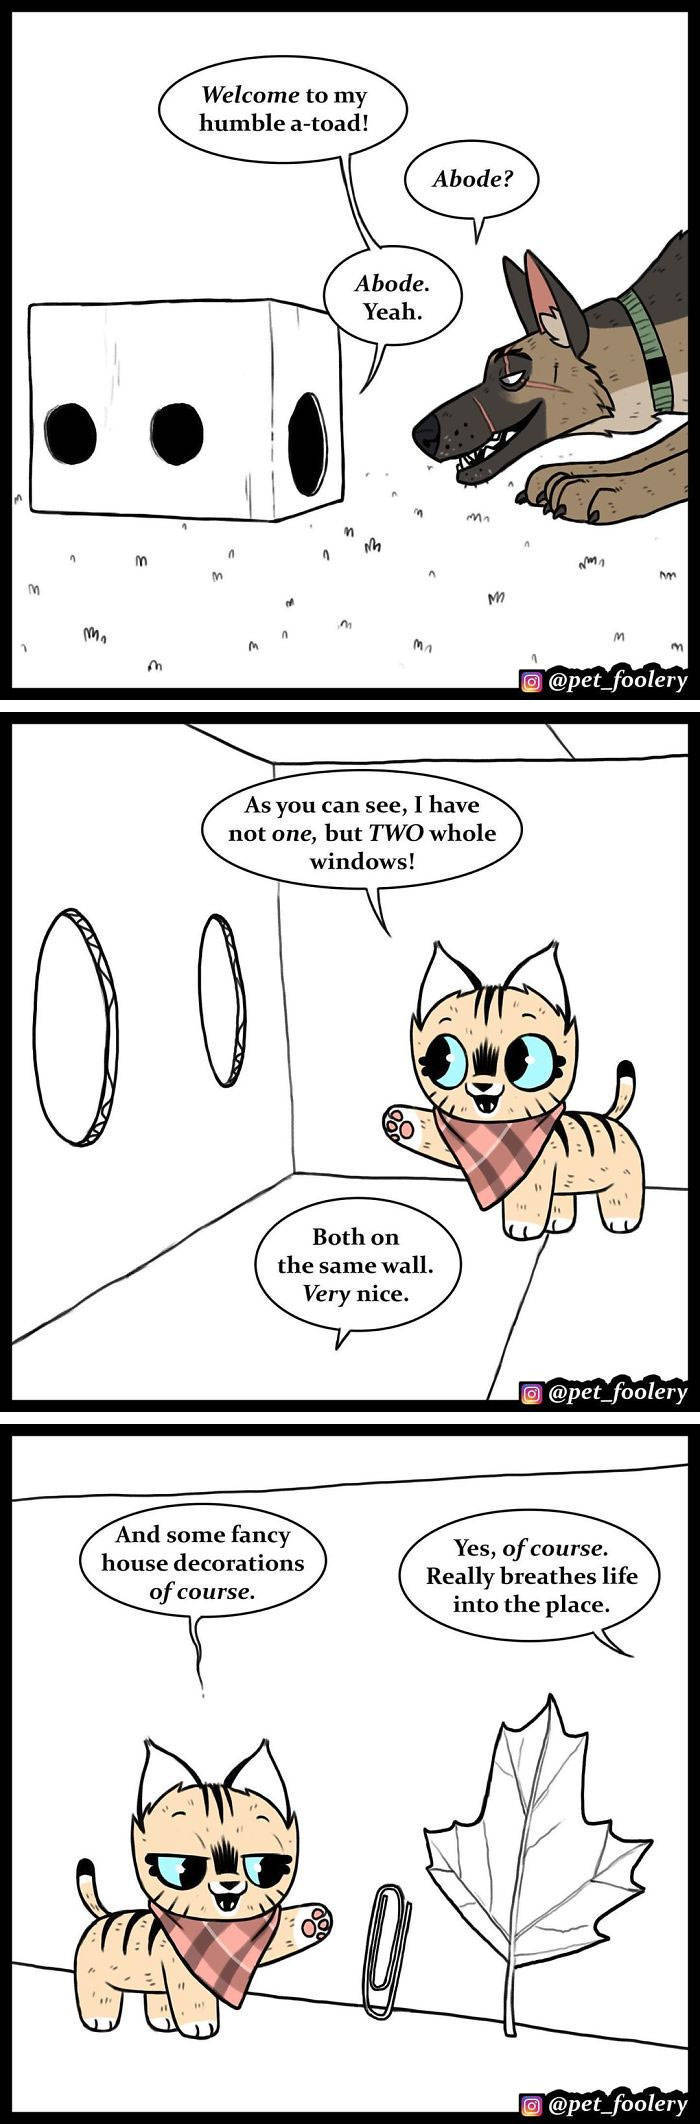 Best Of The Newest “Pixie And Brutus” Comics